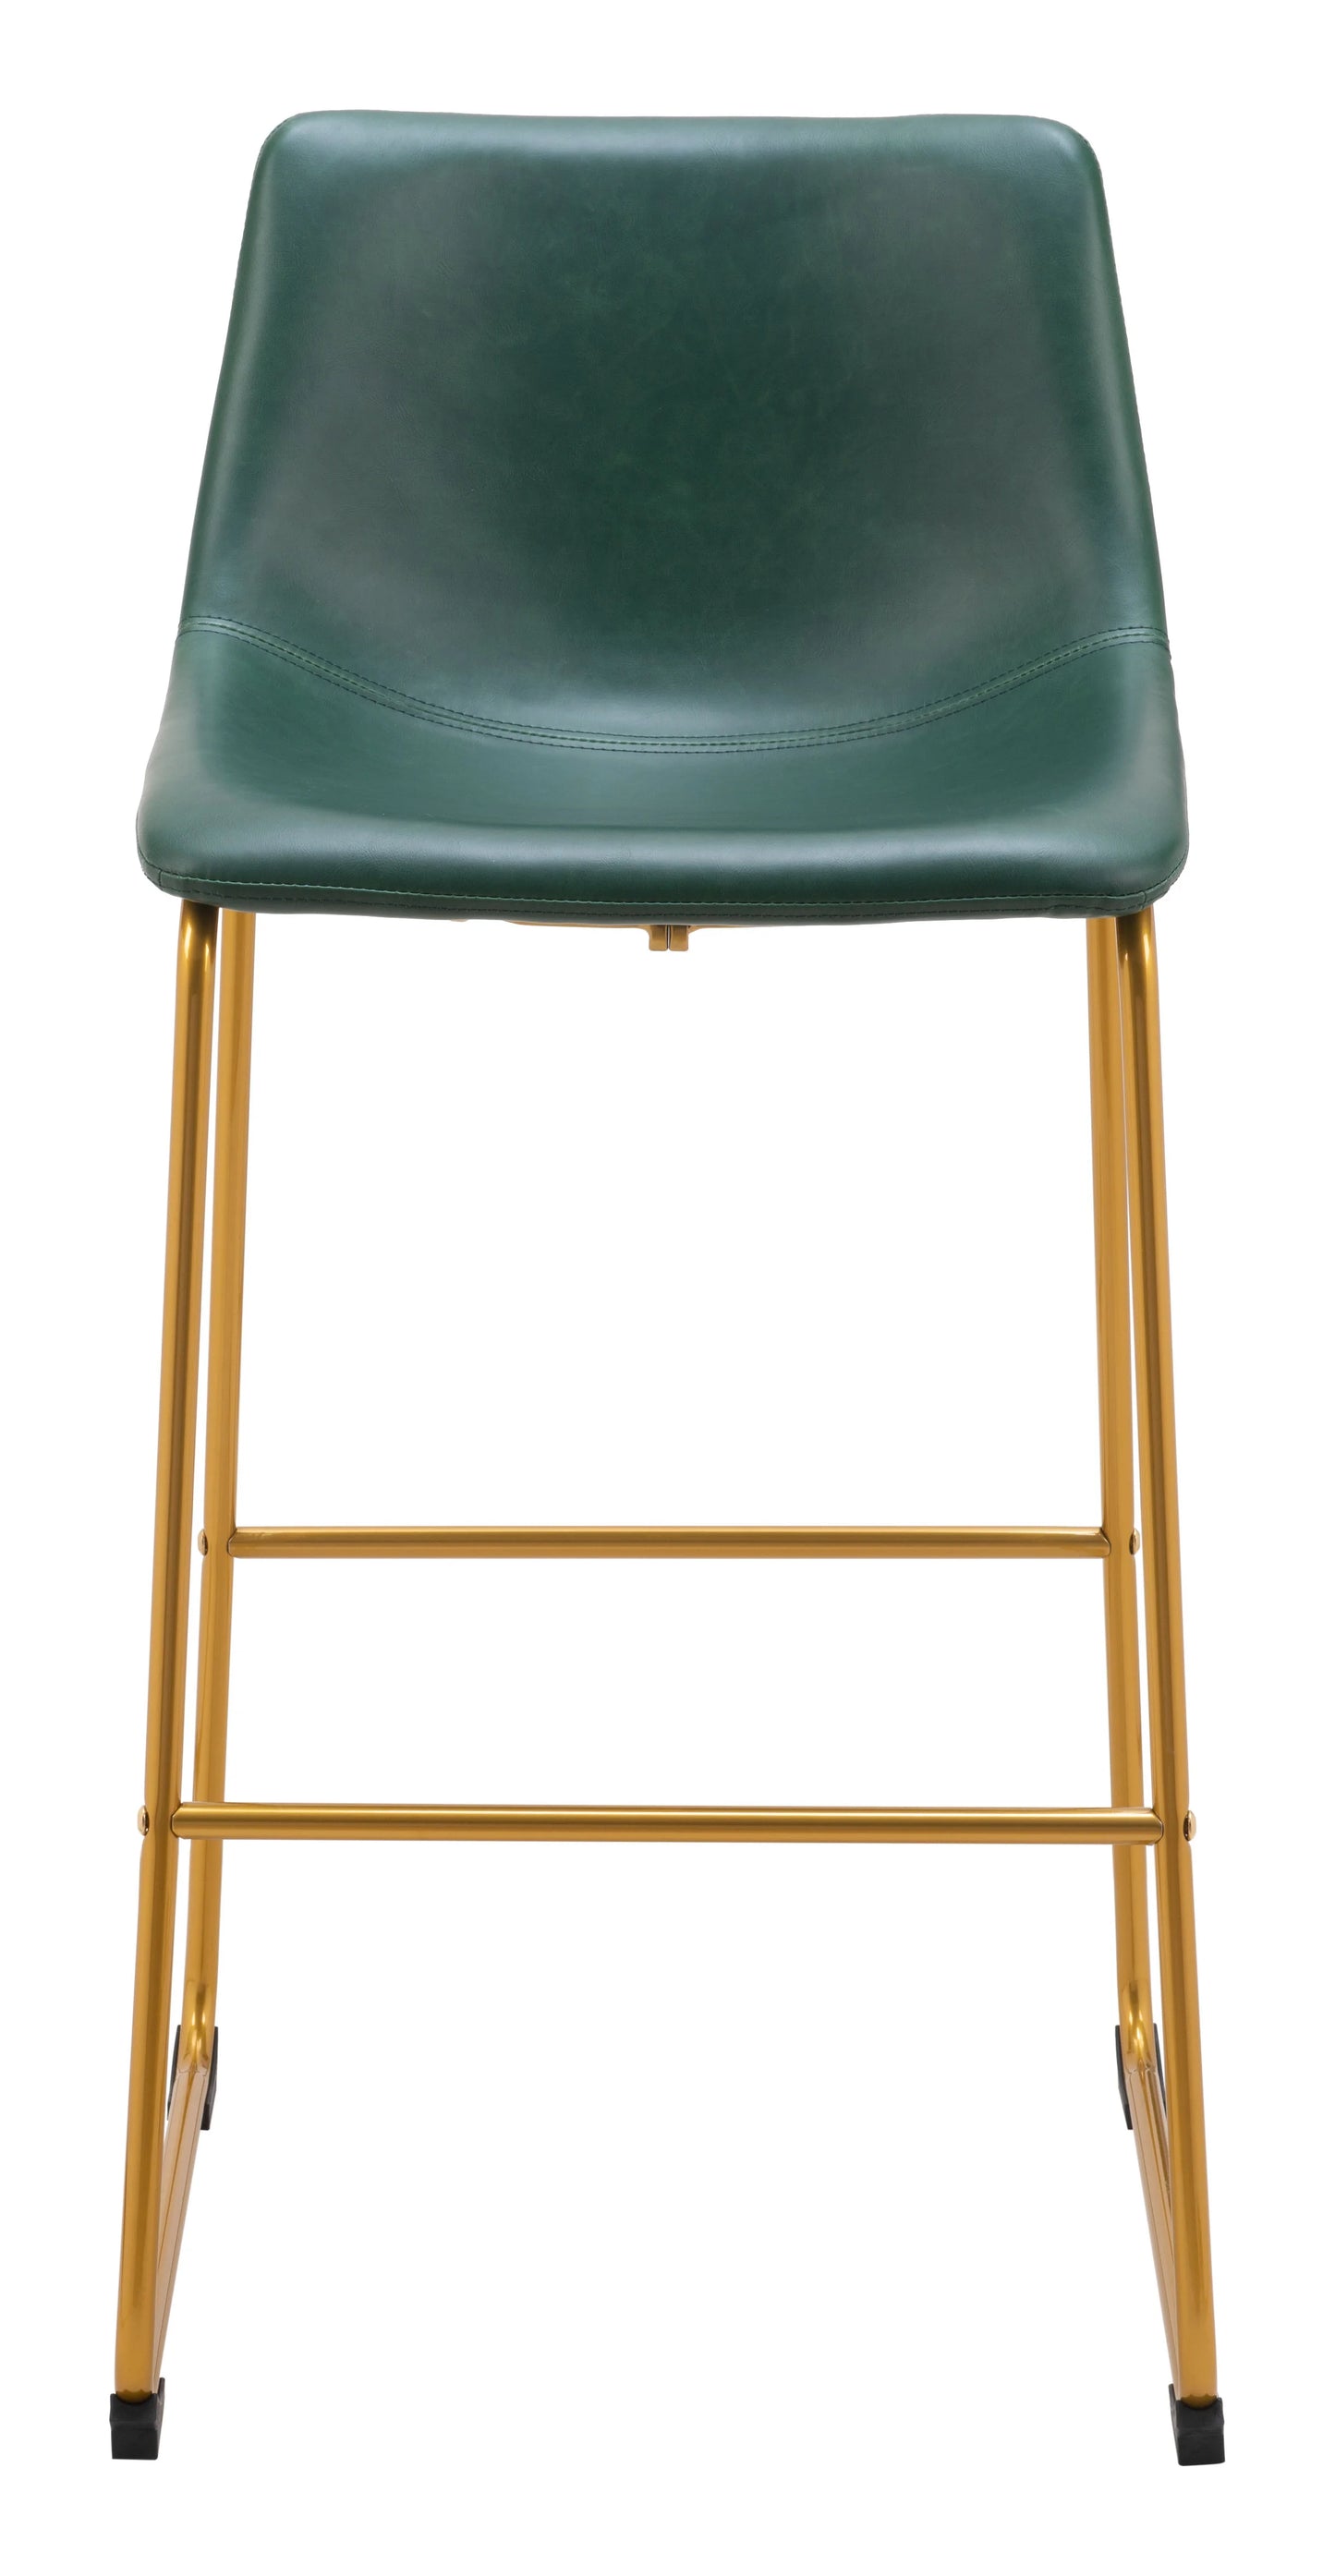 Modern glam stool with green seat